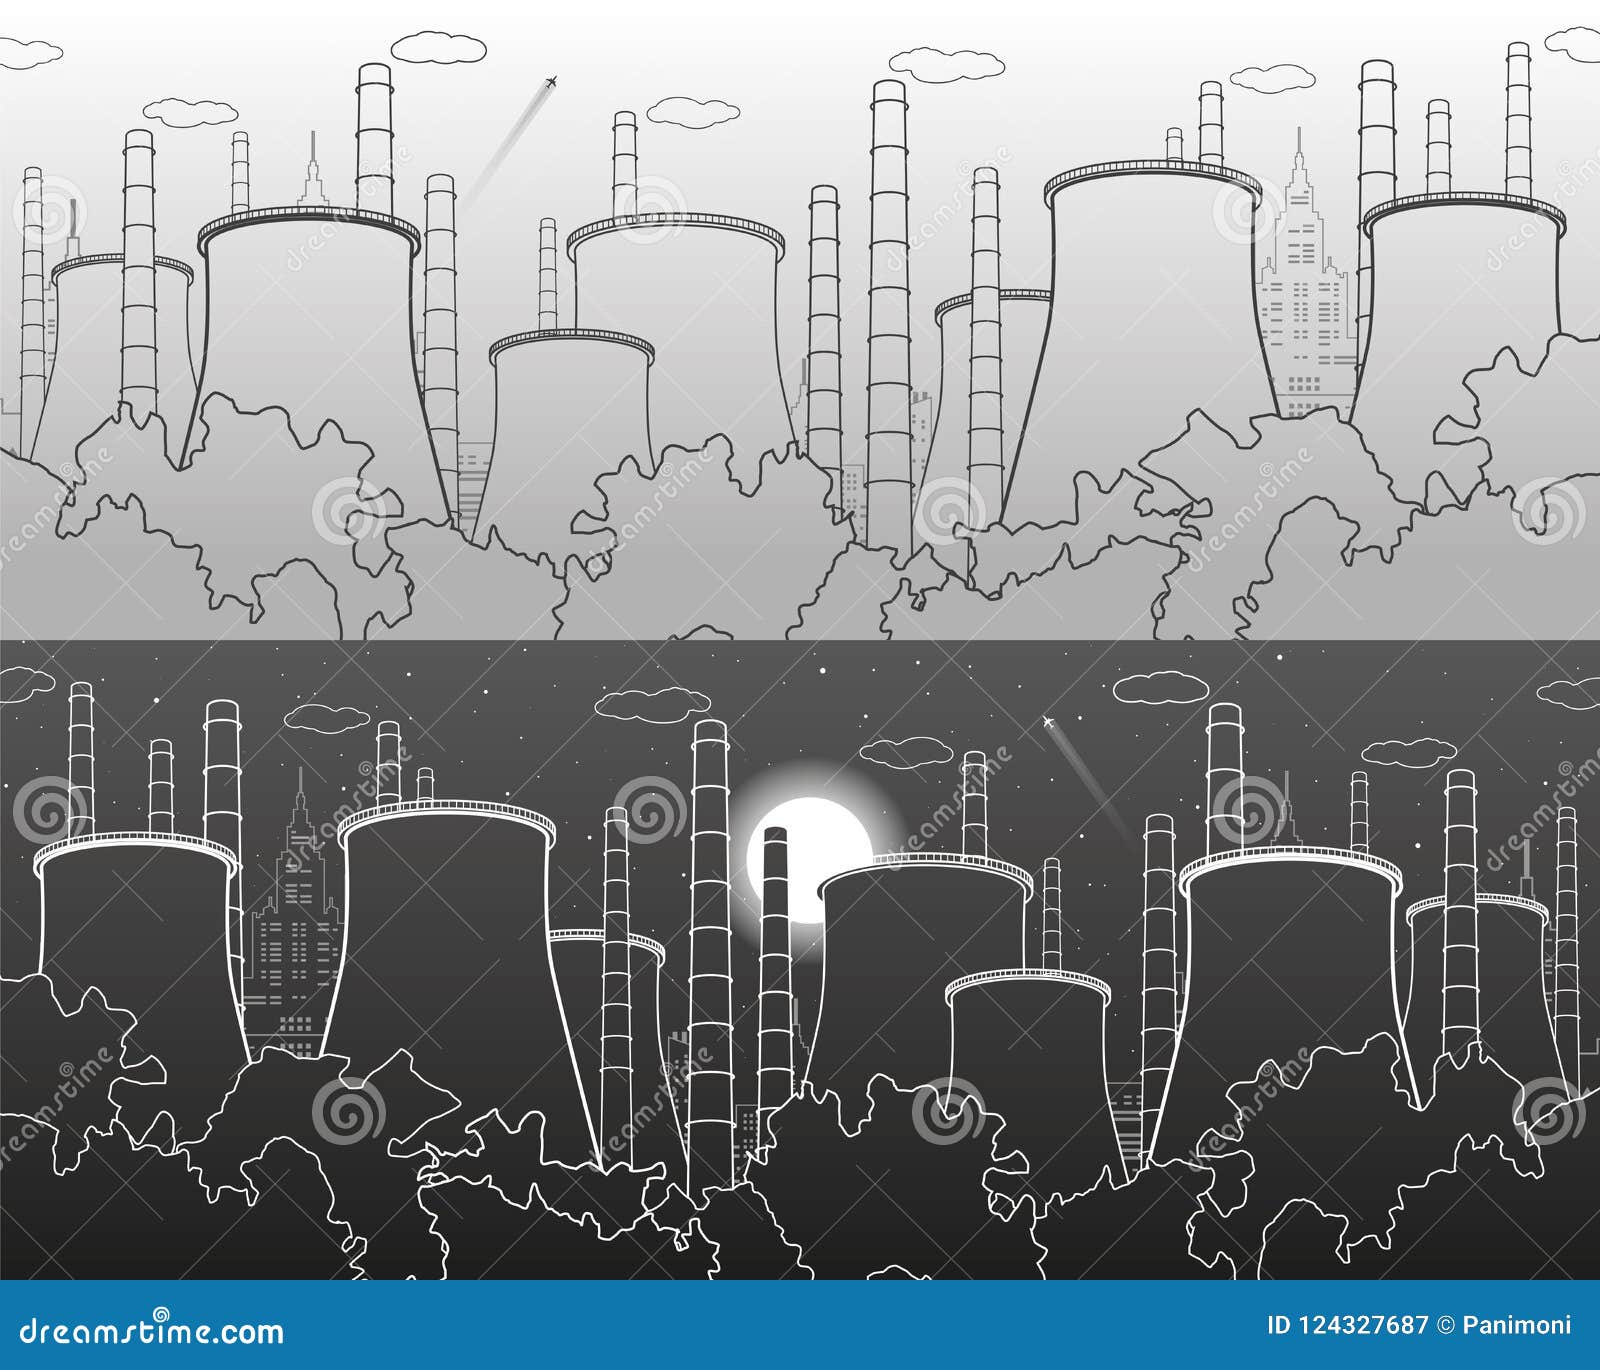 Industry Illustration Factory Thermal Power Plant Urban Scene Pipes And Smoke White And Gray Lines On Light And Dark Backgroun Stock Vector Illustration Of Modern Background 124327687